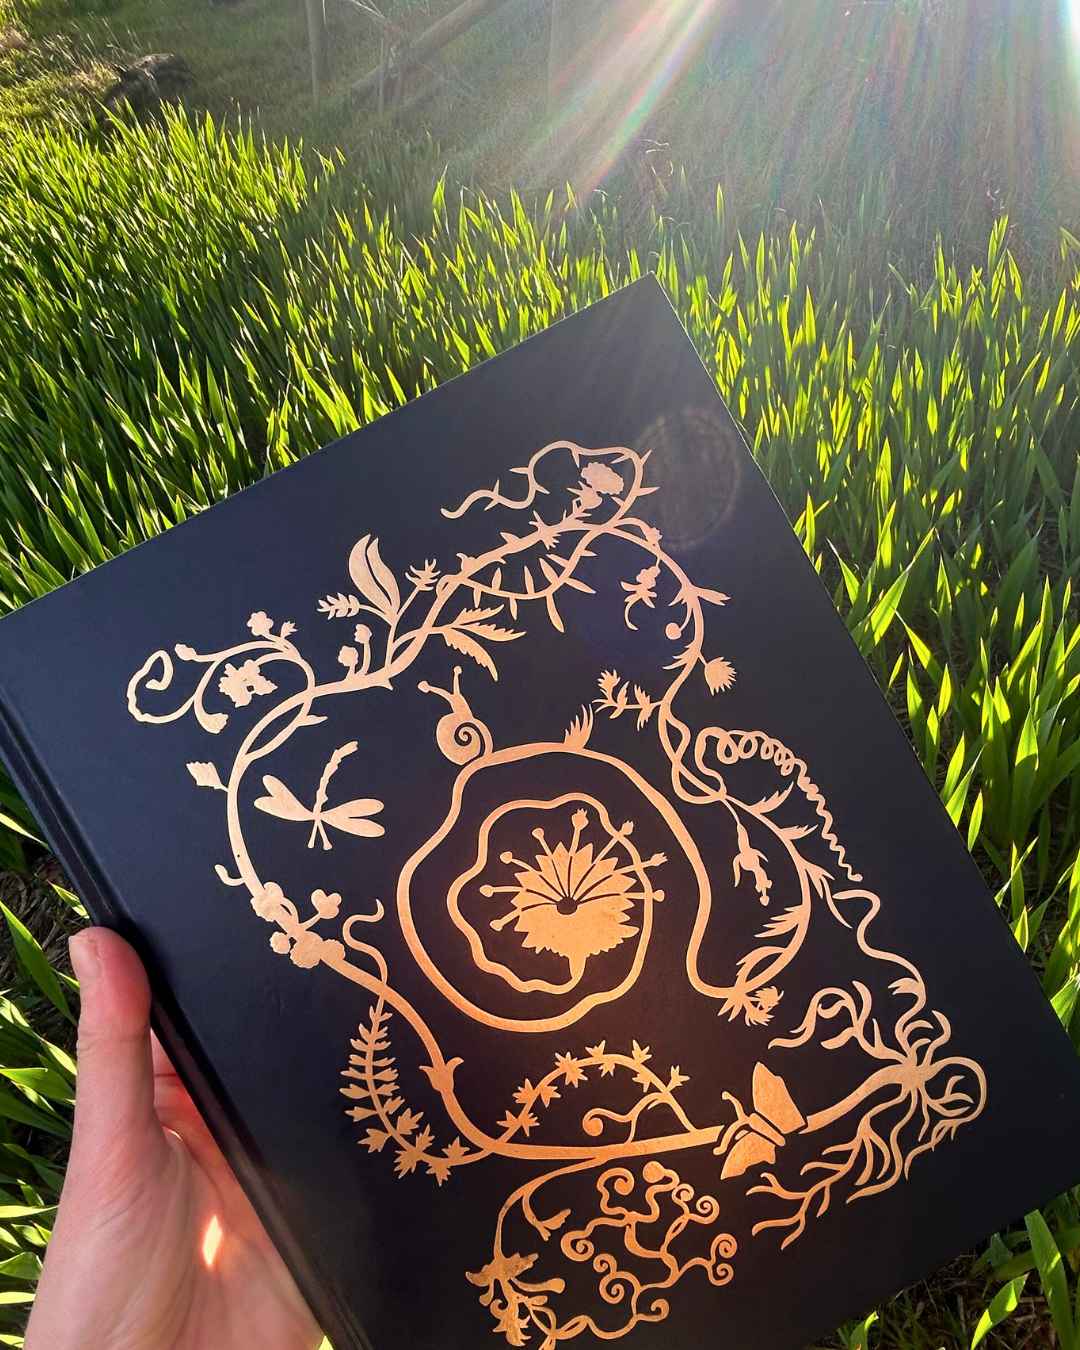 Secret Grimoire of Plant and Crystal Magic